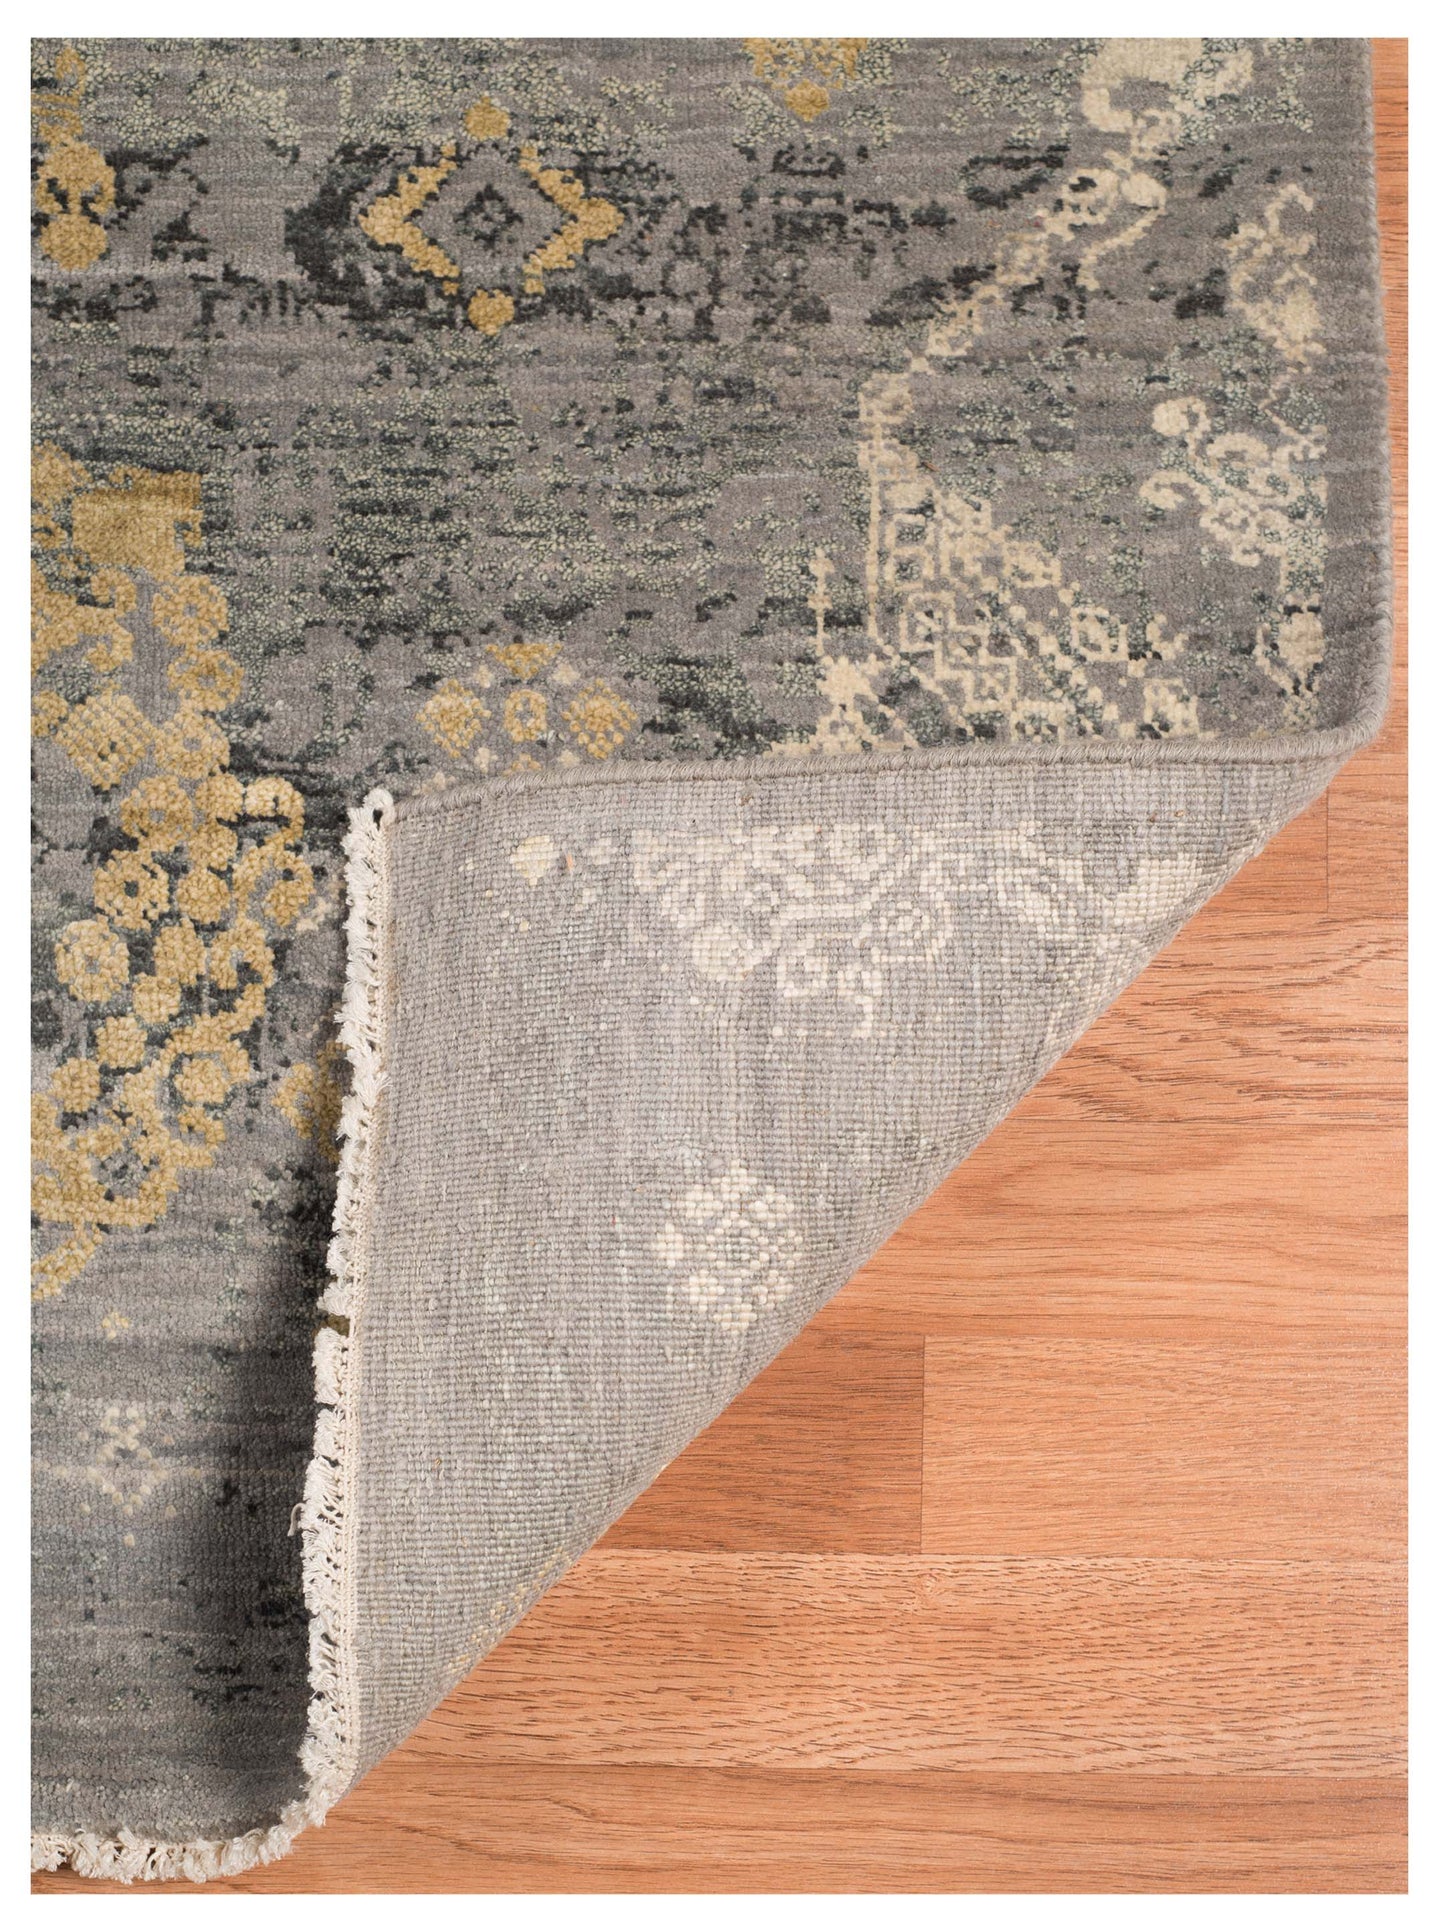 Limited PARKES PA-565 SILVER SAND Transitional Knotted Rug